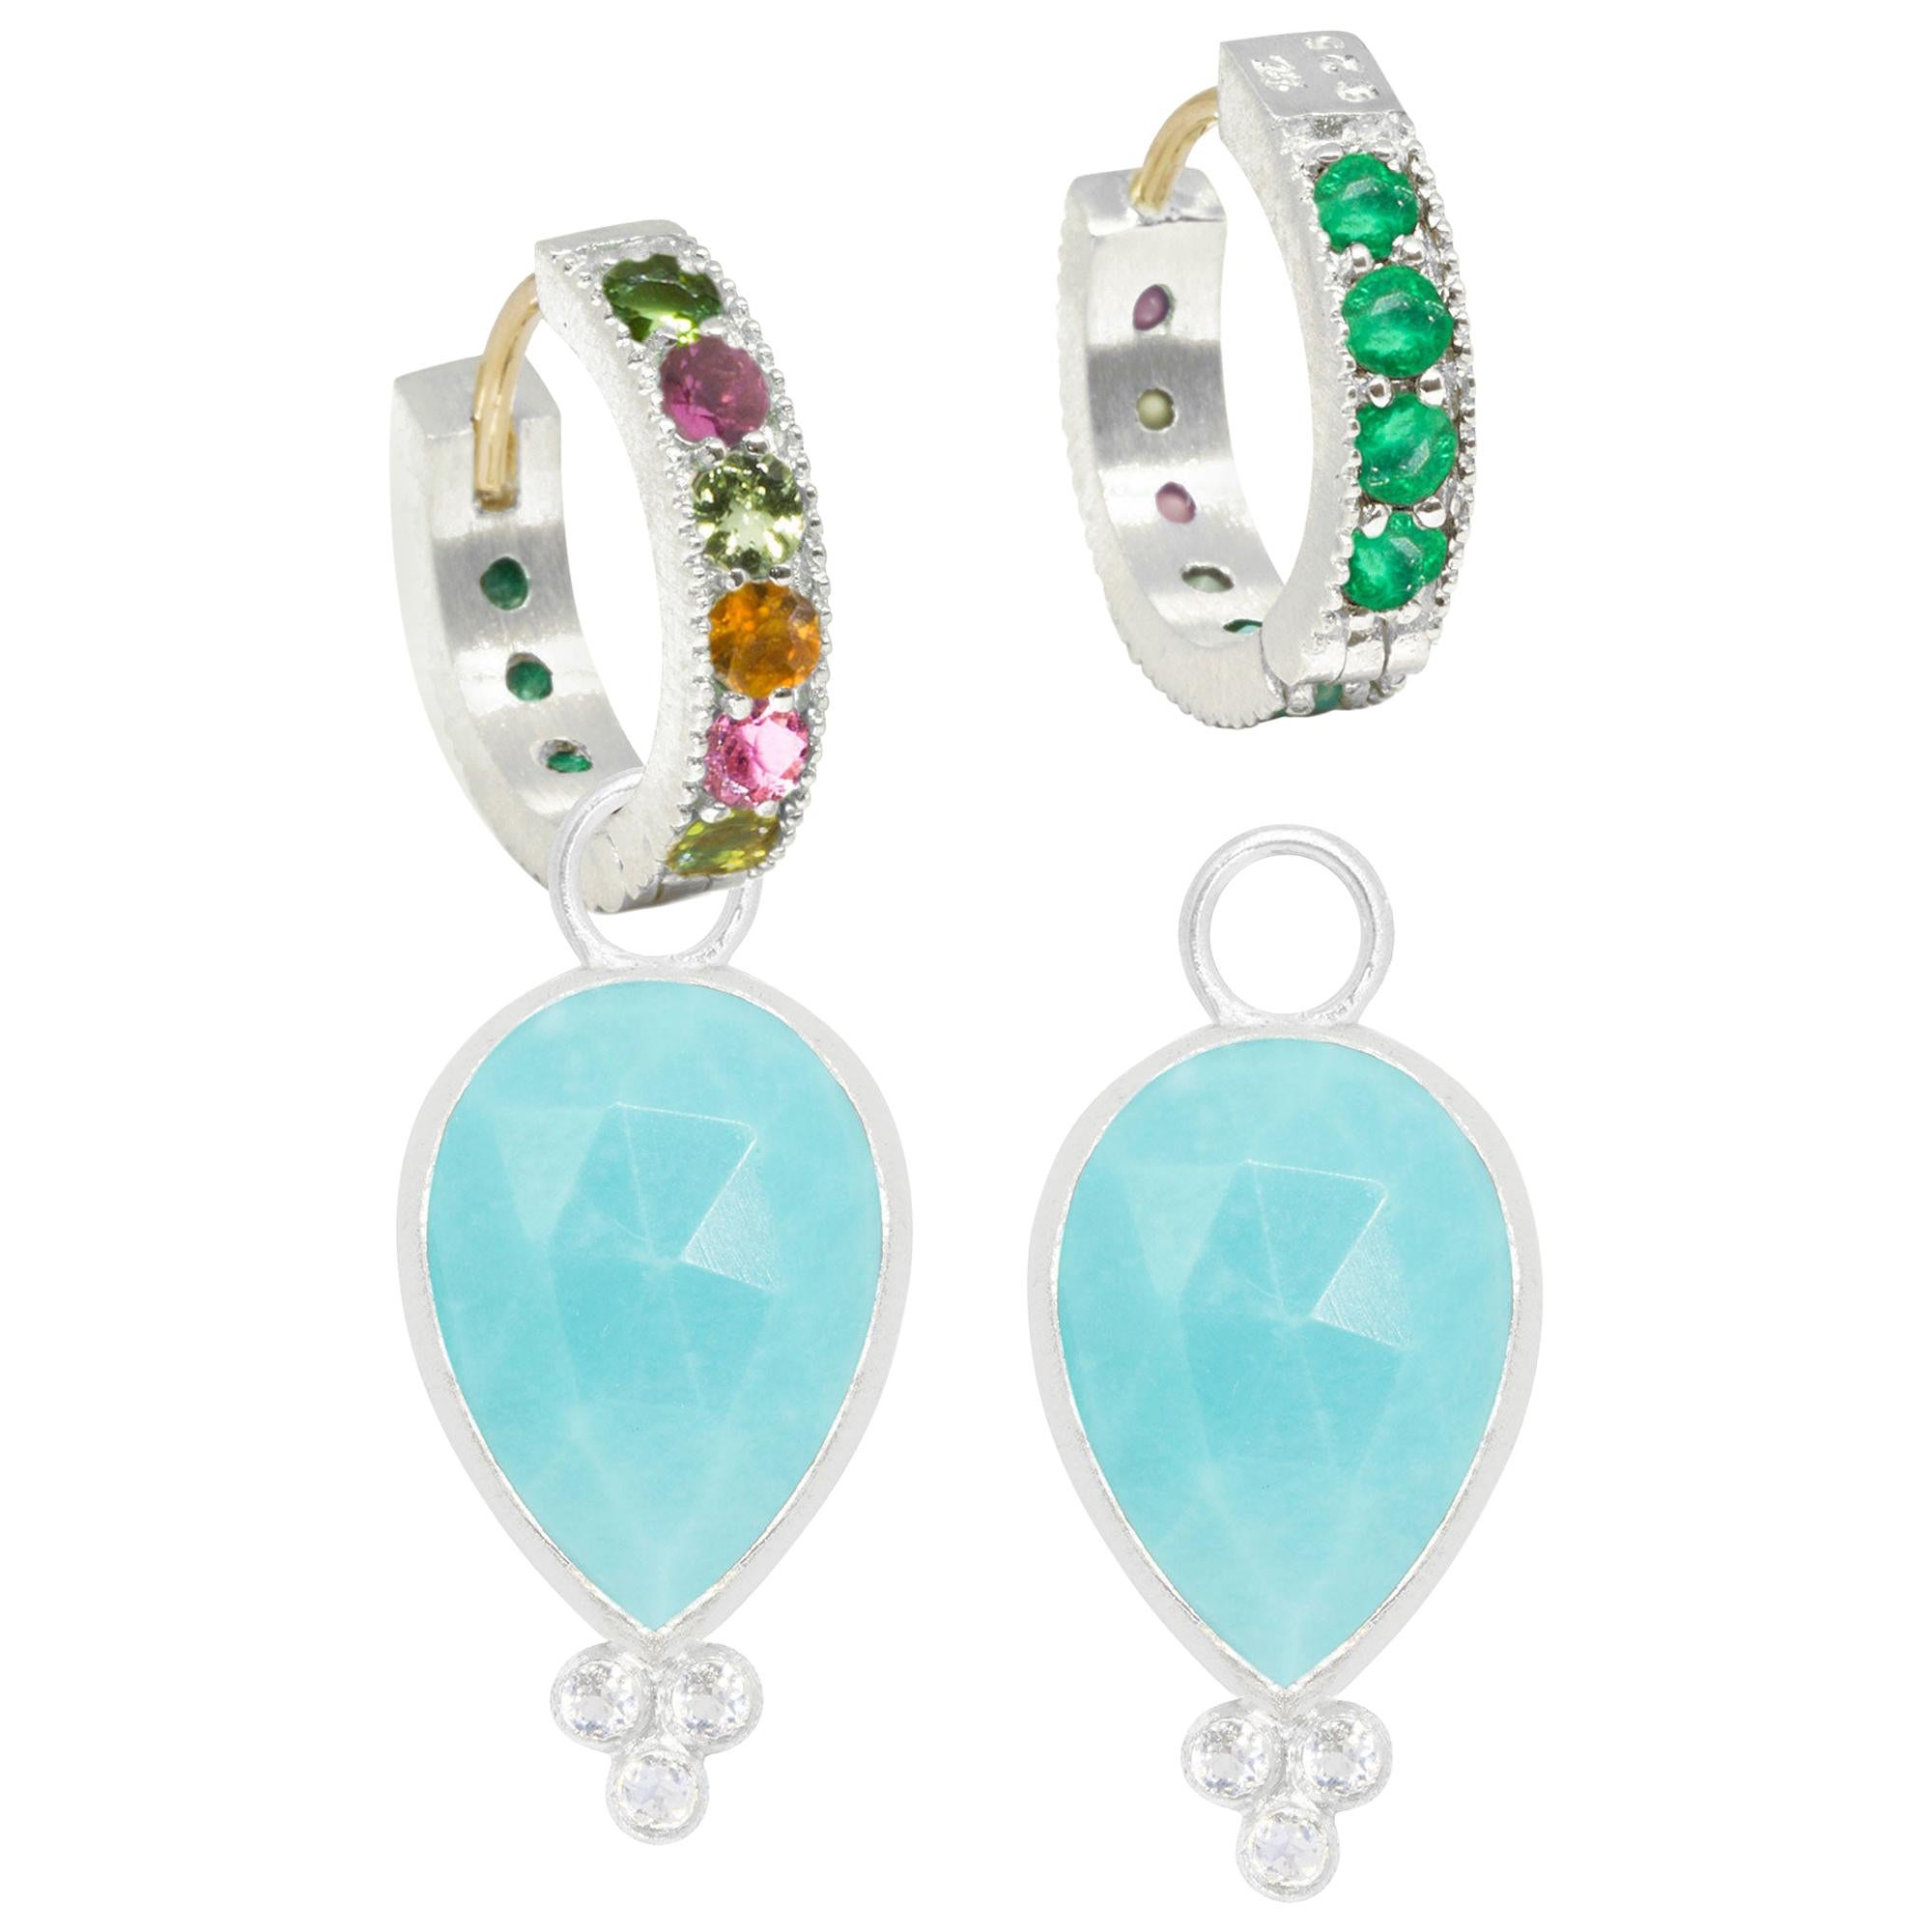 Mia Turquoise Charms and Intricate Silver Reversible Huggies Earrings